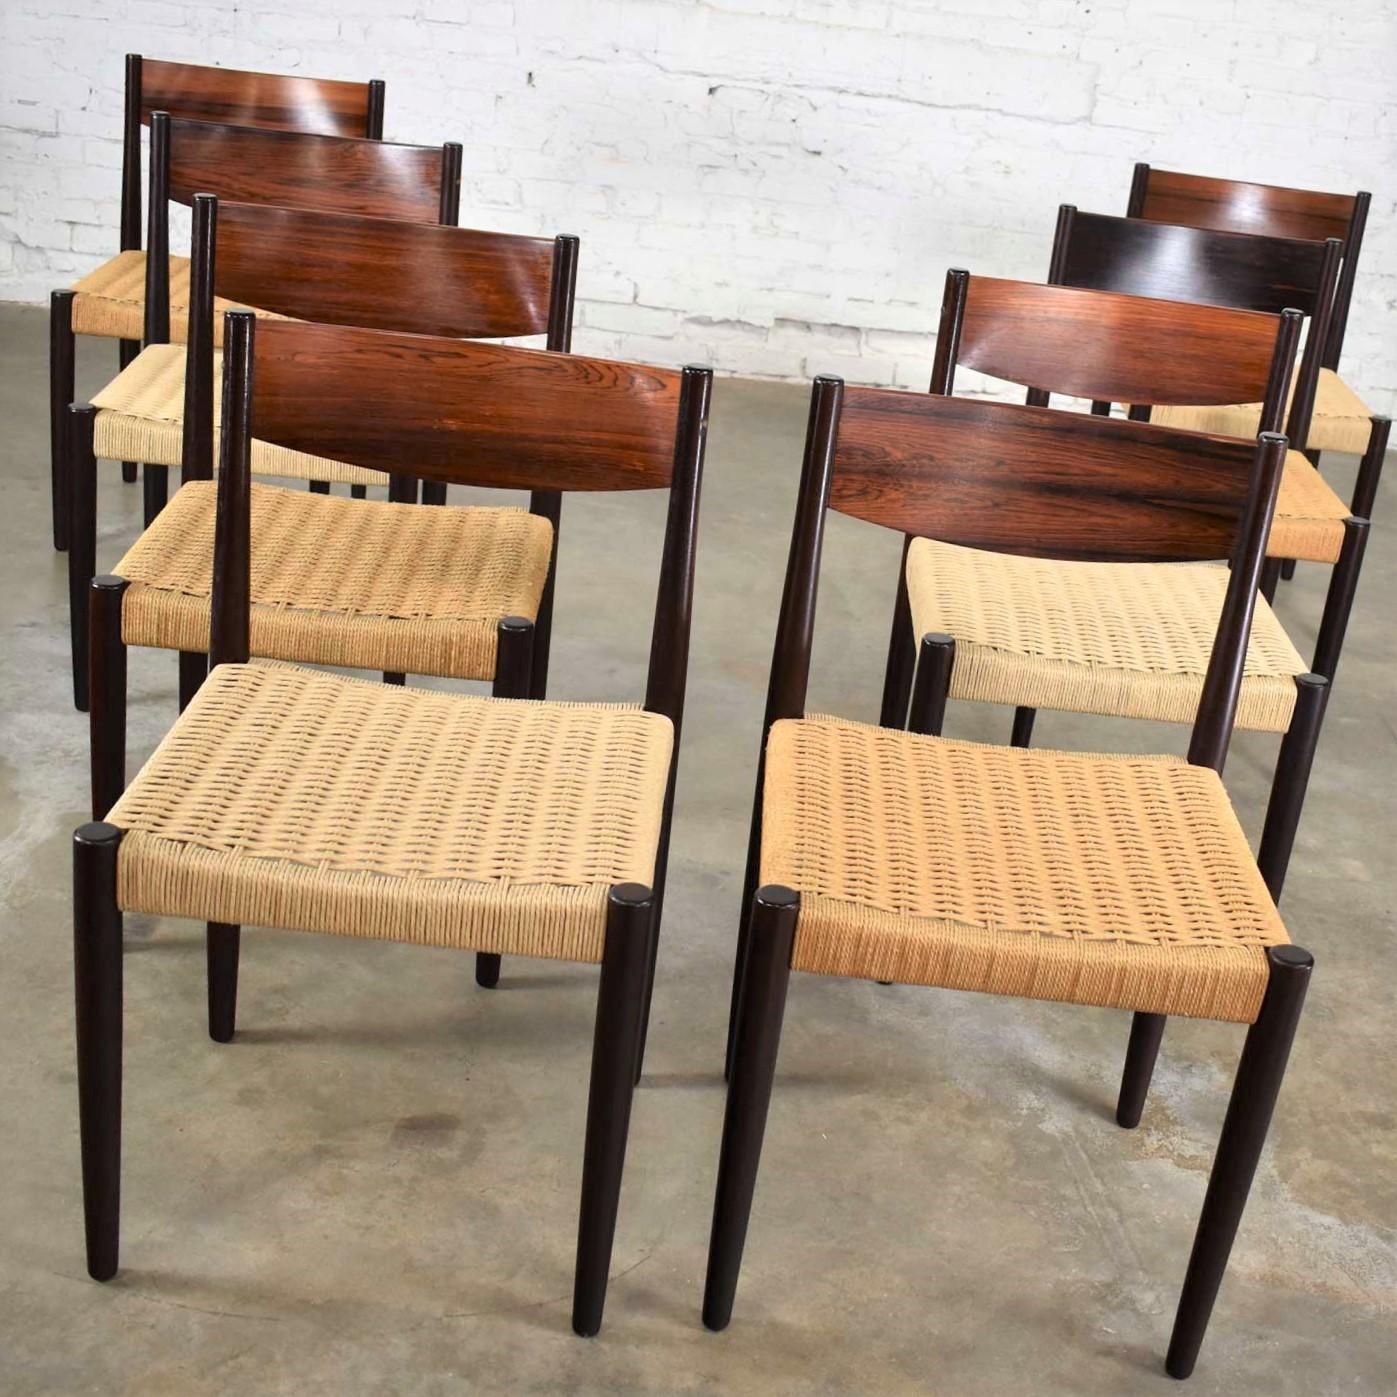 Handsome set of 8 Scandinavian Modern rosewood and paper cord dining chairs designed by Poul Volther and produced by Frem Røjle. They are in fabulous vintage condition. Four of the chairs have new cording and is a bit lighter in color than the old